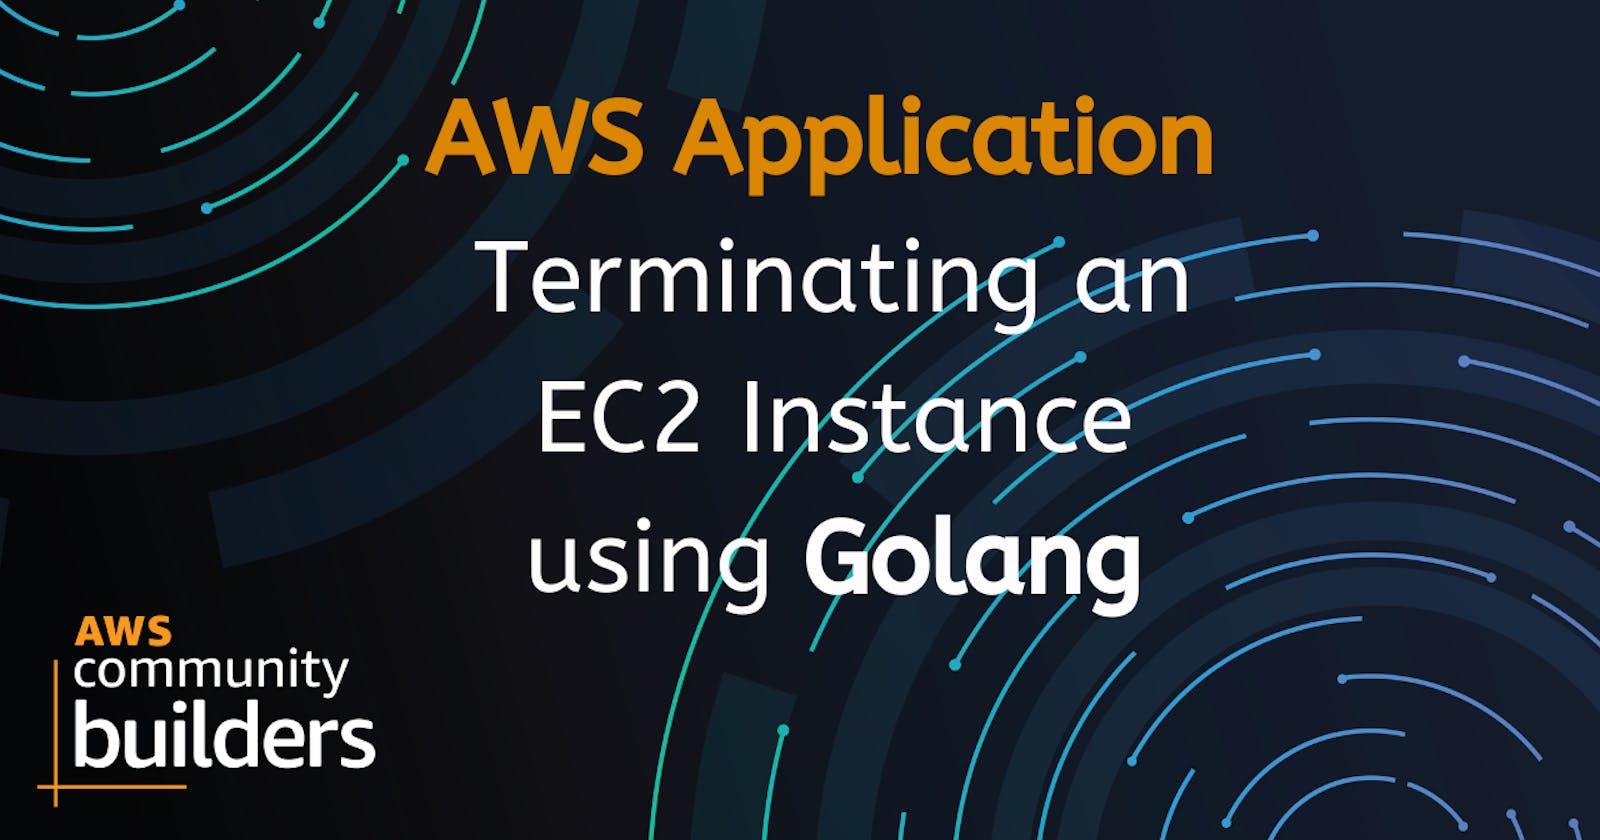 Terminating EC2 Instances with Go and AWS SDK: A Step-by-Step Guide